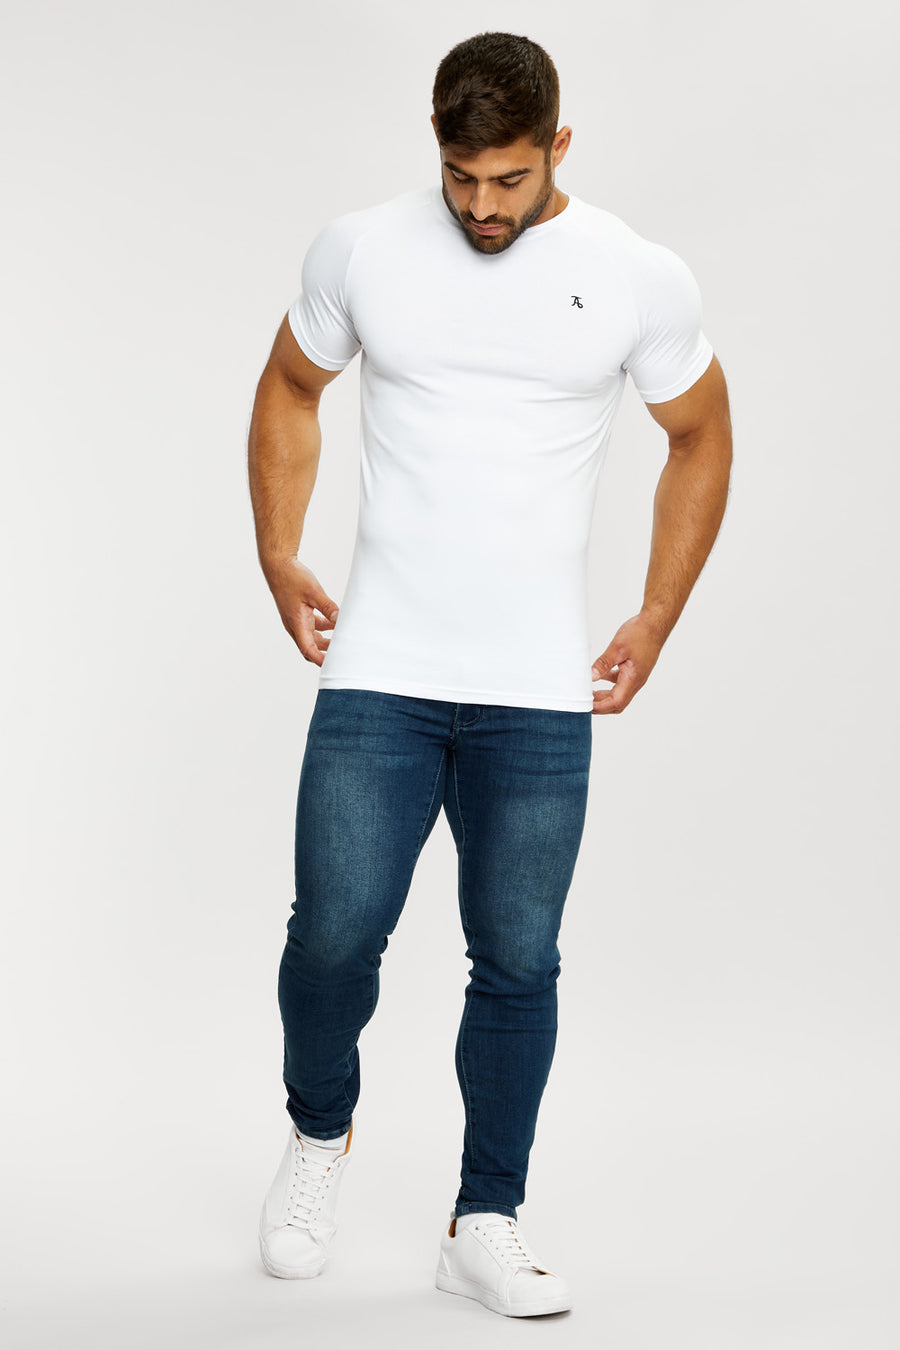 Premium Athletic Fit T-Shirt in White - TAILORED ATHLETE - USA